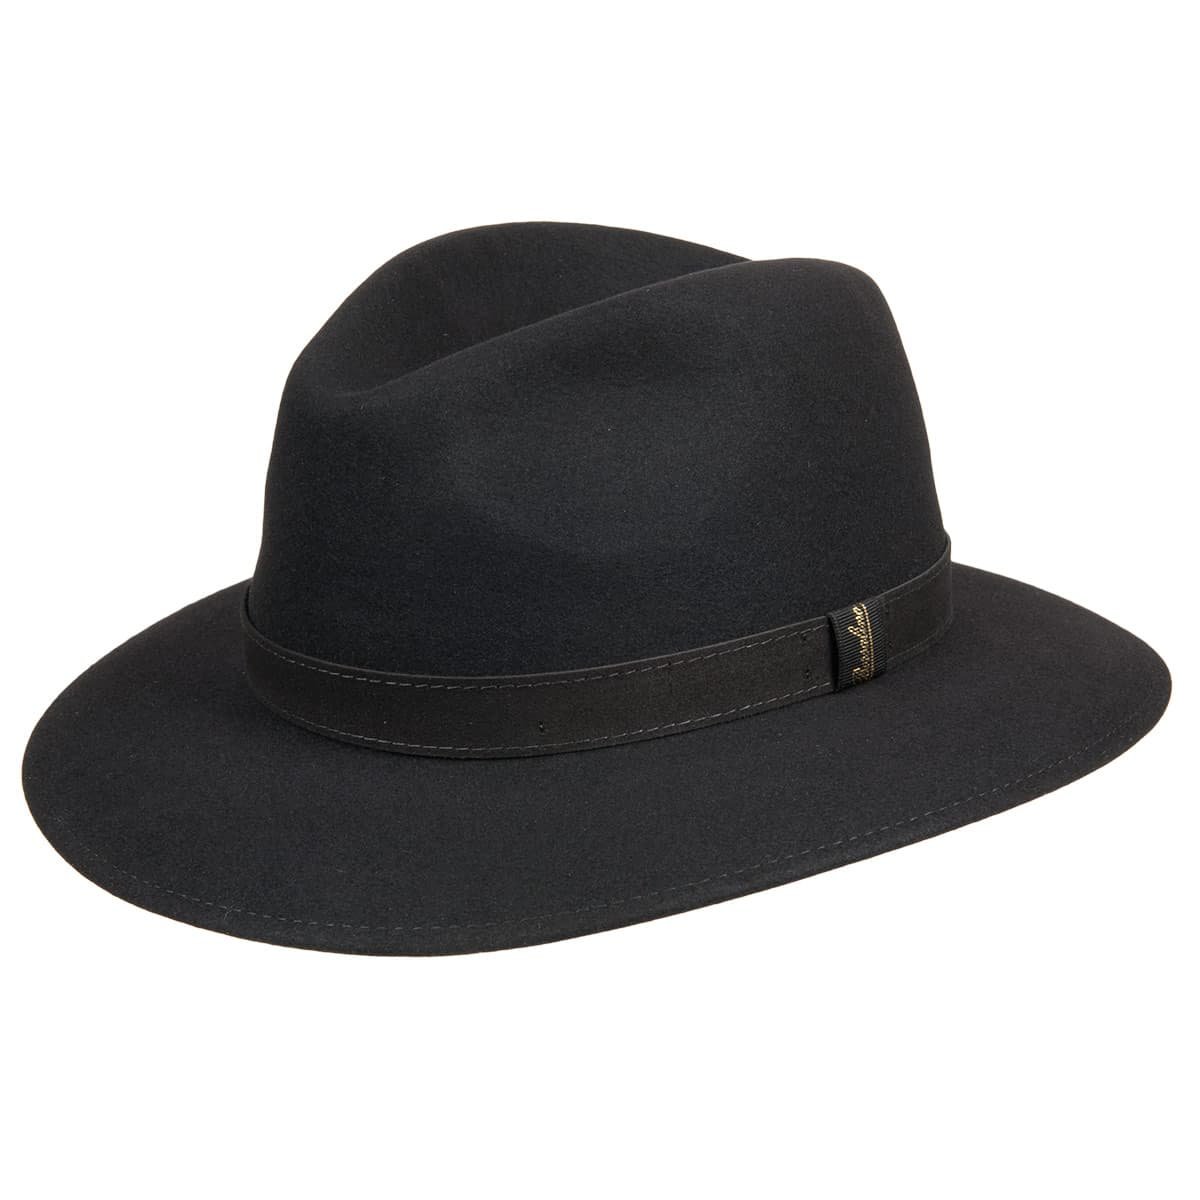 https://pic.hutstuebele.com/Men-hat-by-Borsalino-Traveller-of-fur-felt-with-a-sporty-leather-strap-set.10941a.jpg